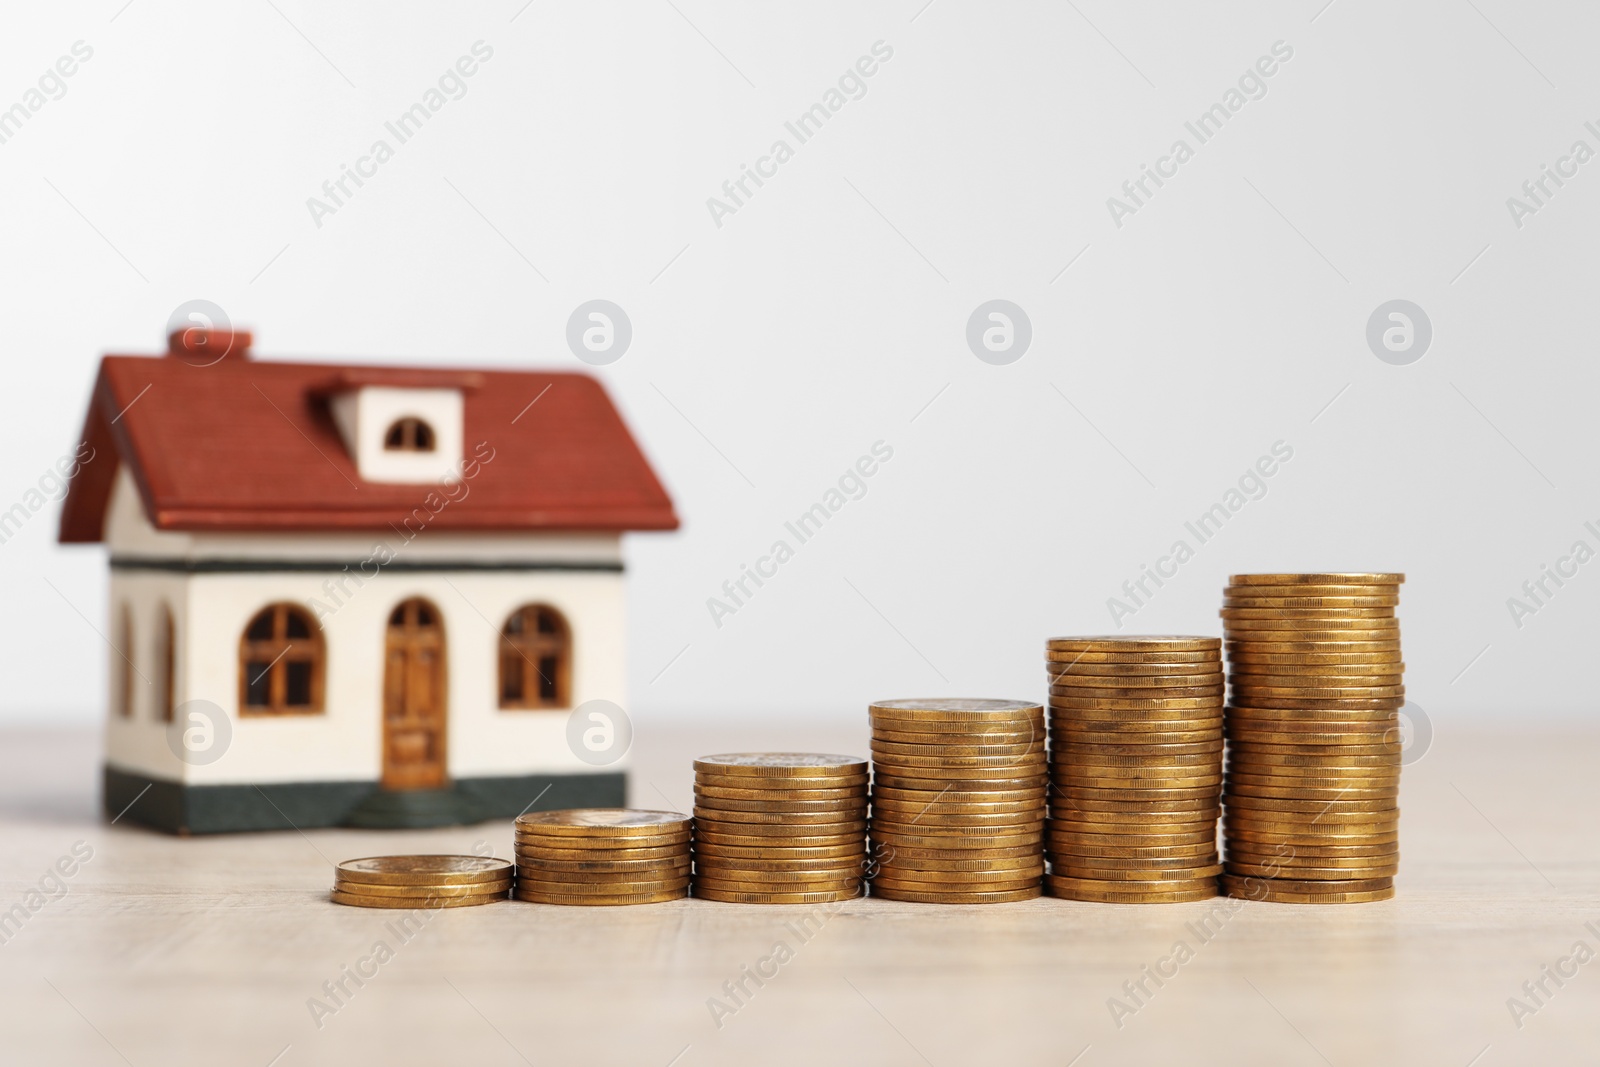 Photo of Mortgage concept. House model and stacks of coins on wooden table against white background, selective focus. Space for text